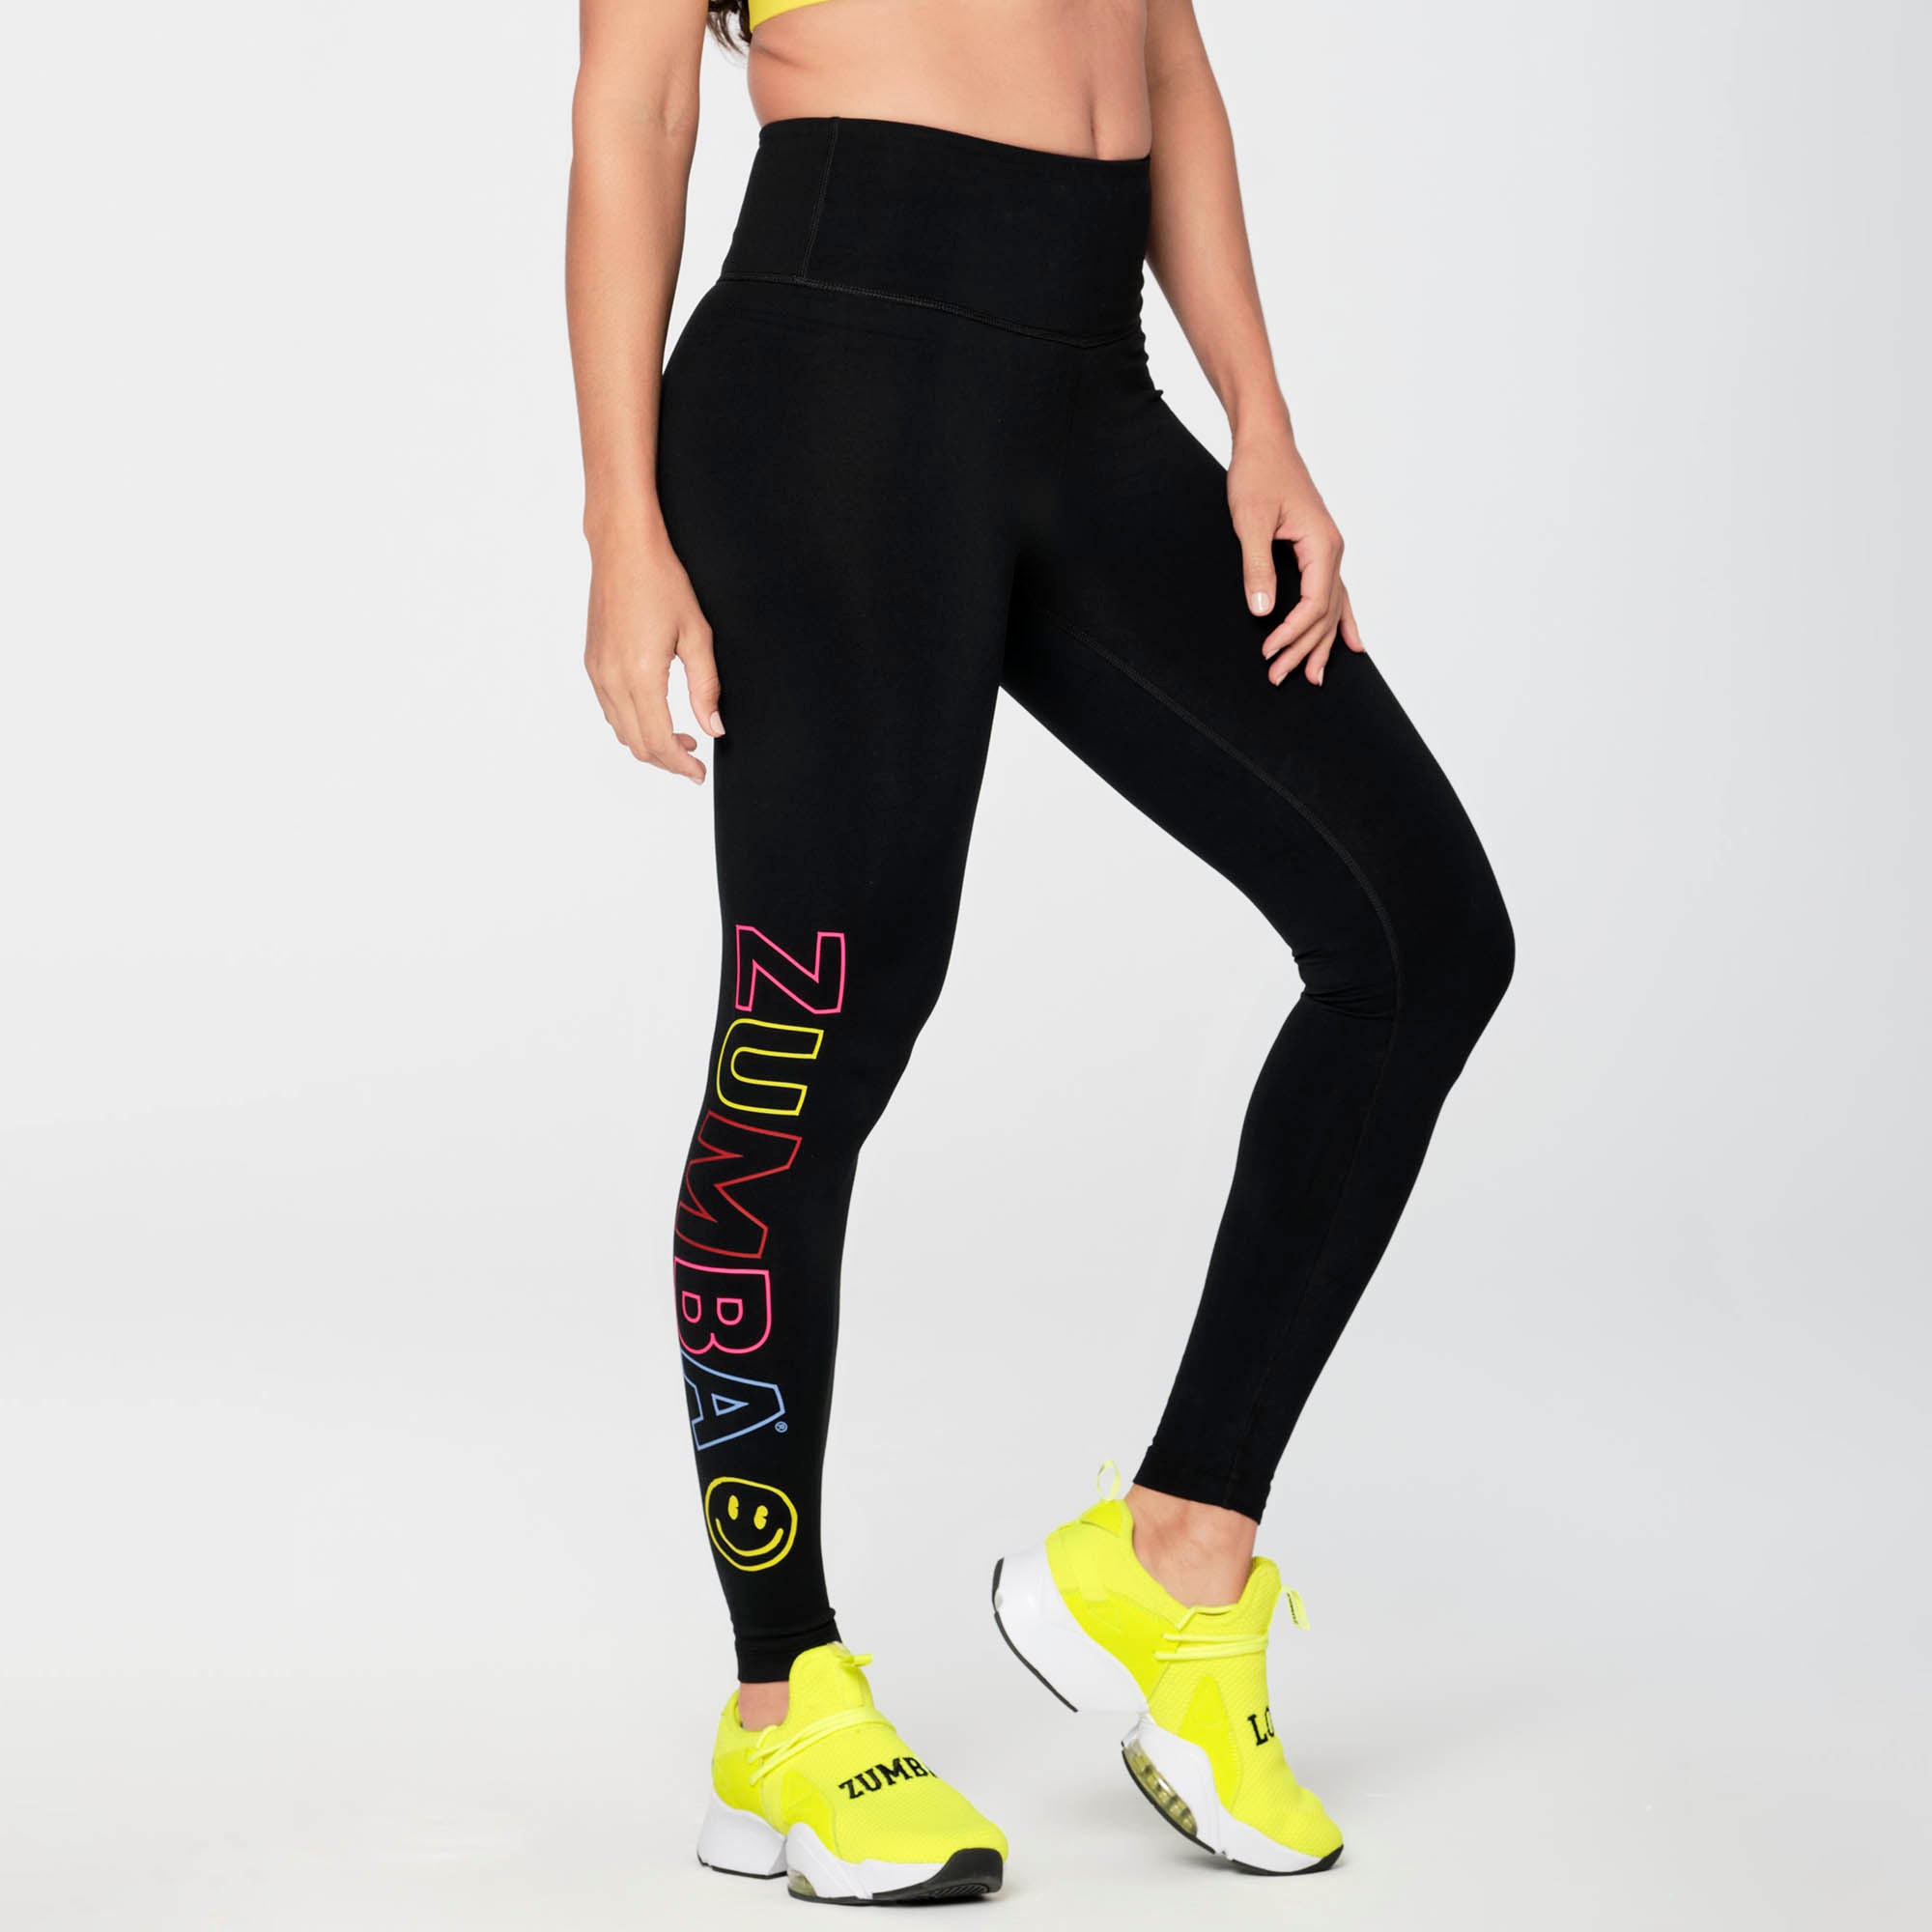 Zumba Happy Never Looked Better High Waisted Ankle Leggings - Black / Red  Z1B000158